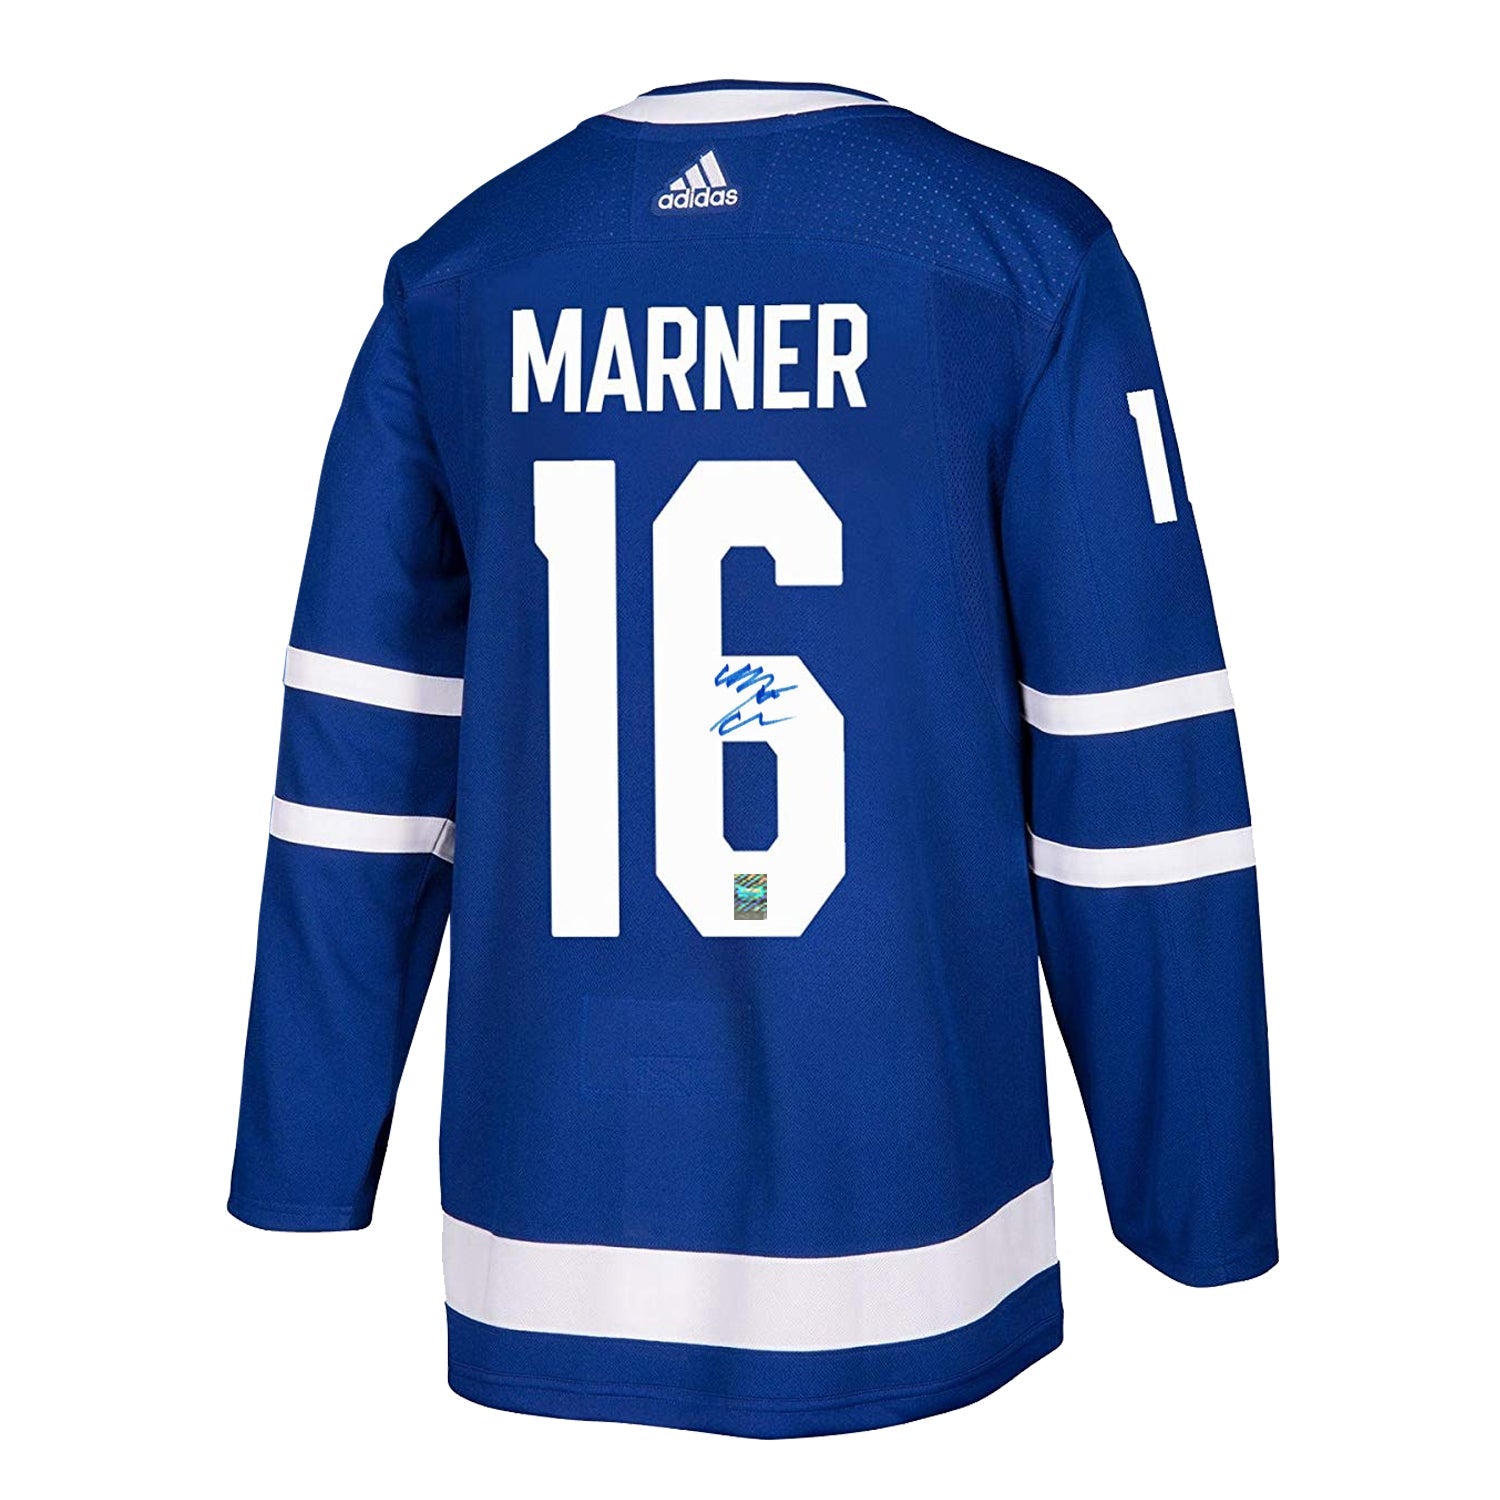 Börje Salming Autographed White Toronto Maple Leafs Jersey at